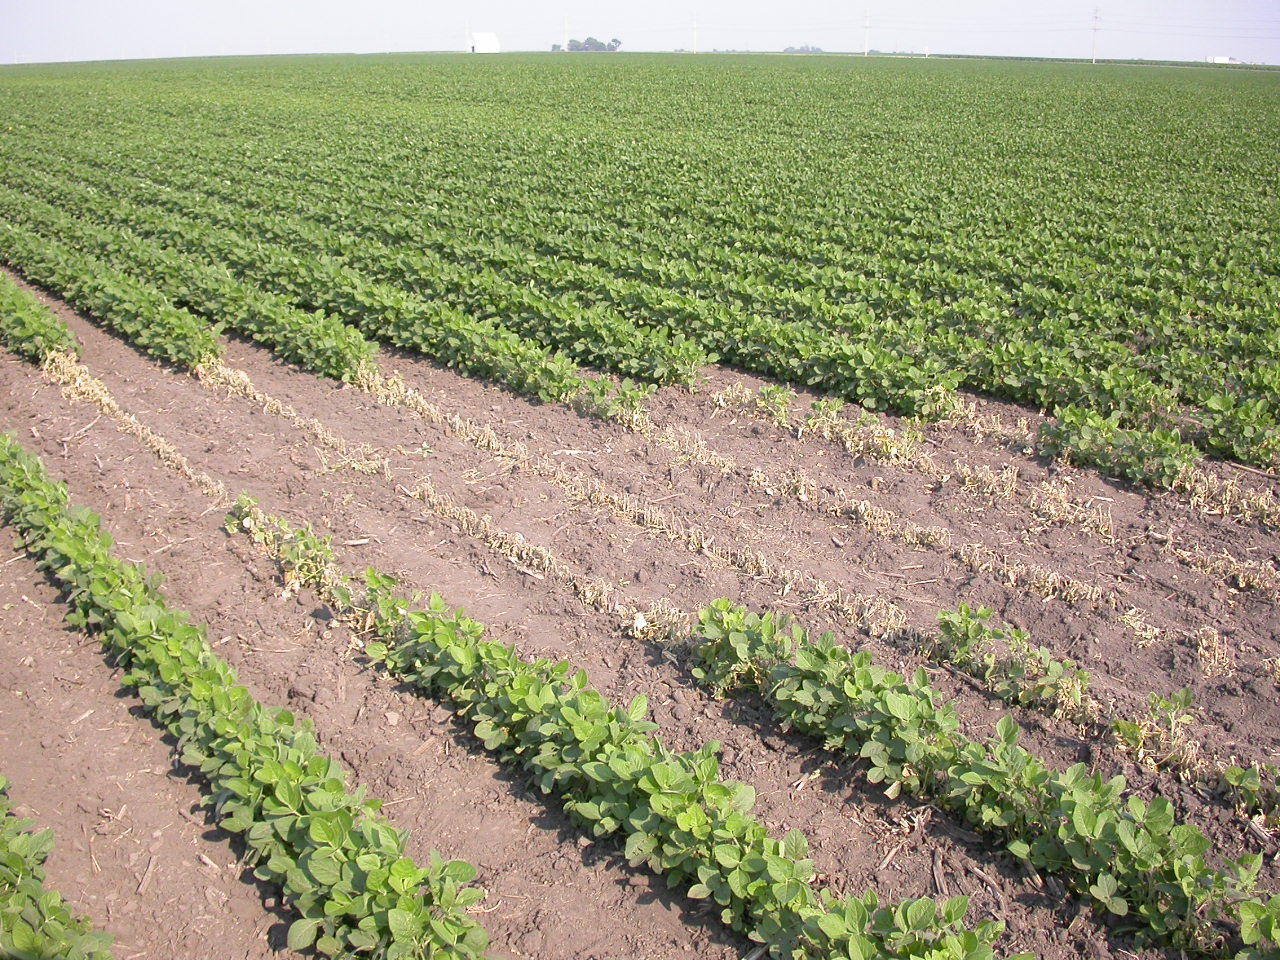 Patch of soybean plants killed by Phytophthora root and stem rot.